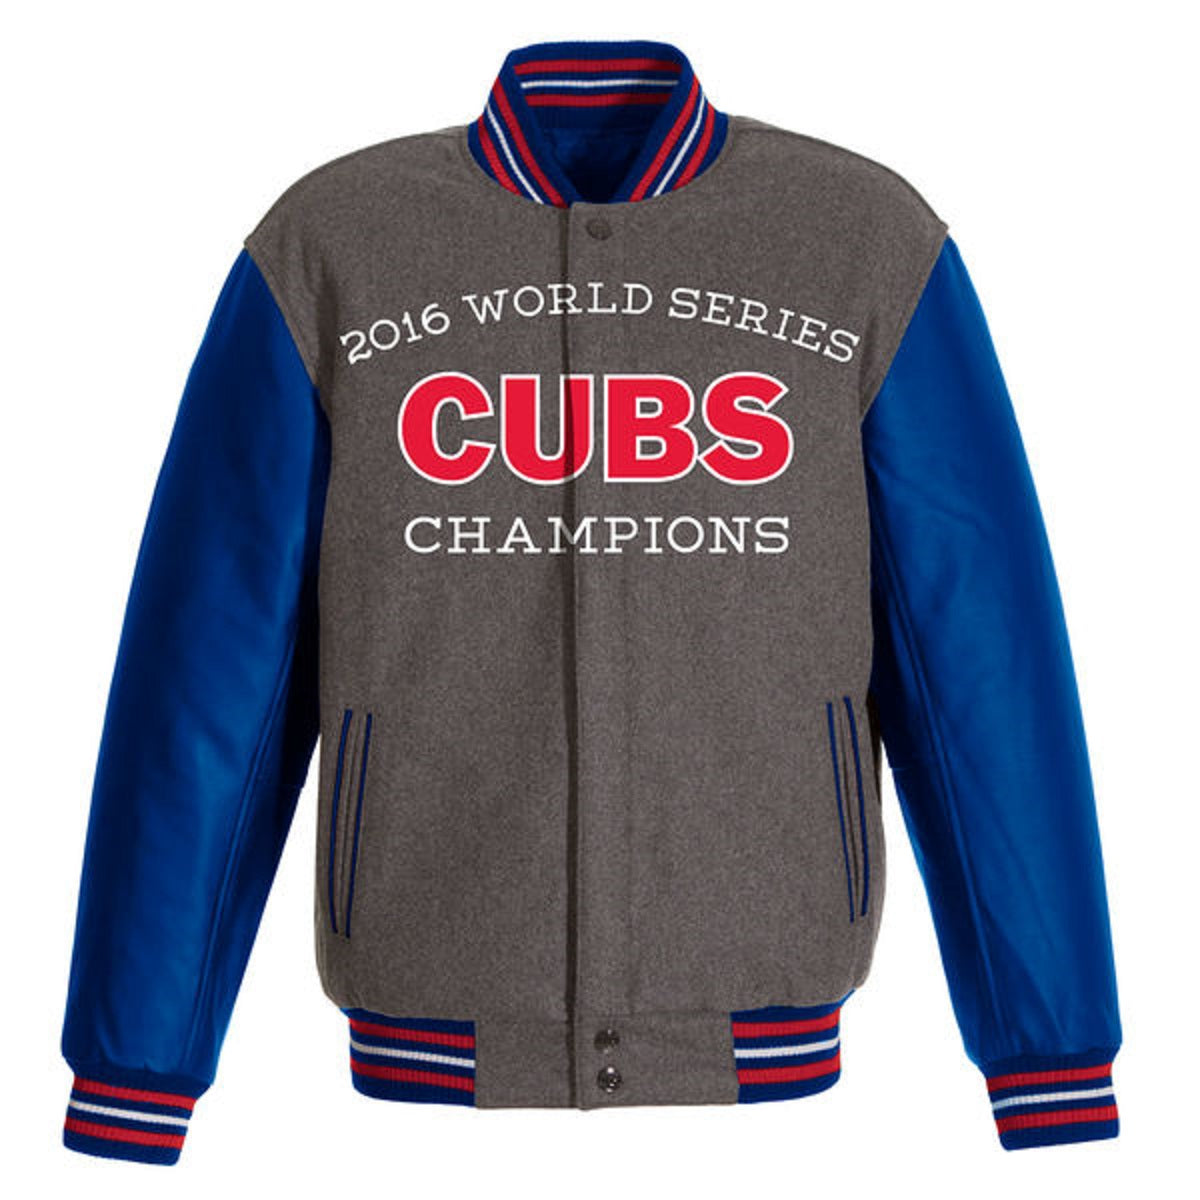 Chicago Cubs JH Design 2016 World Series Champions Commemorative Wool REV Jacket